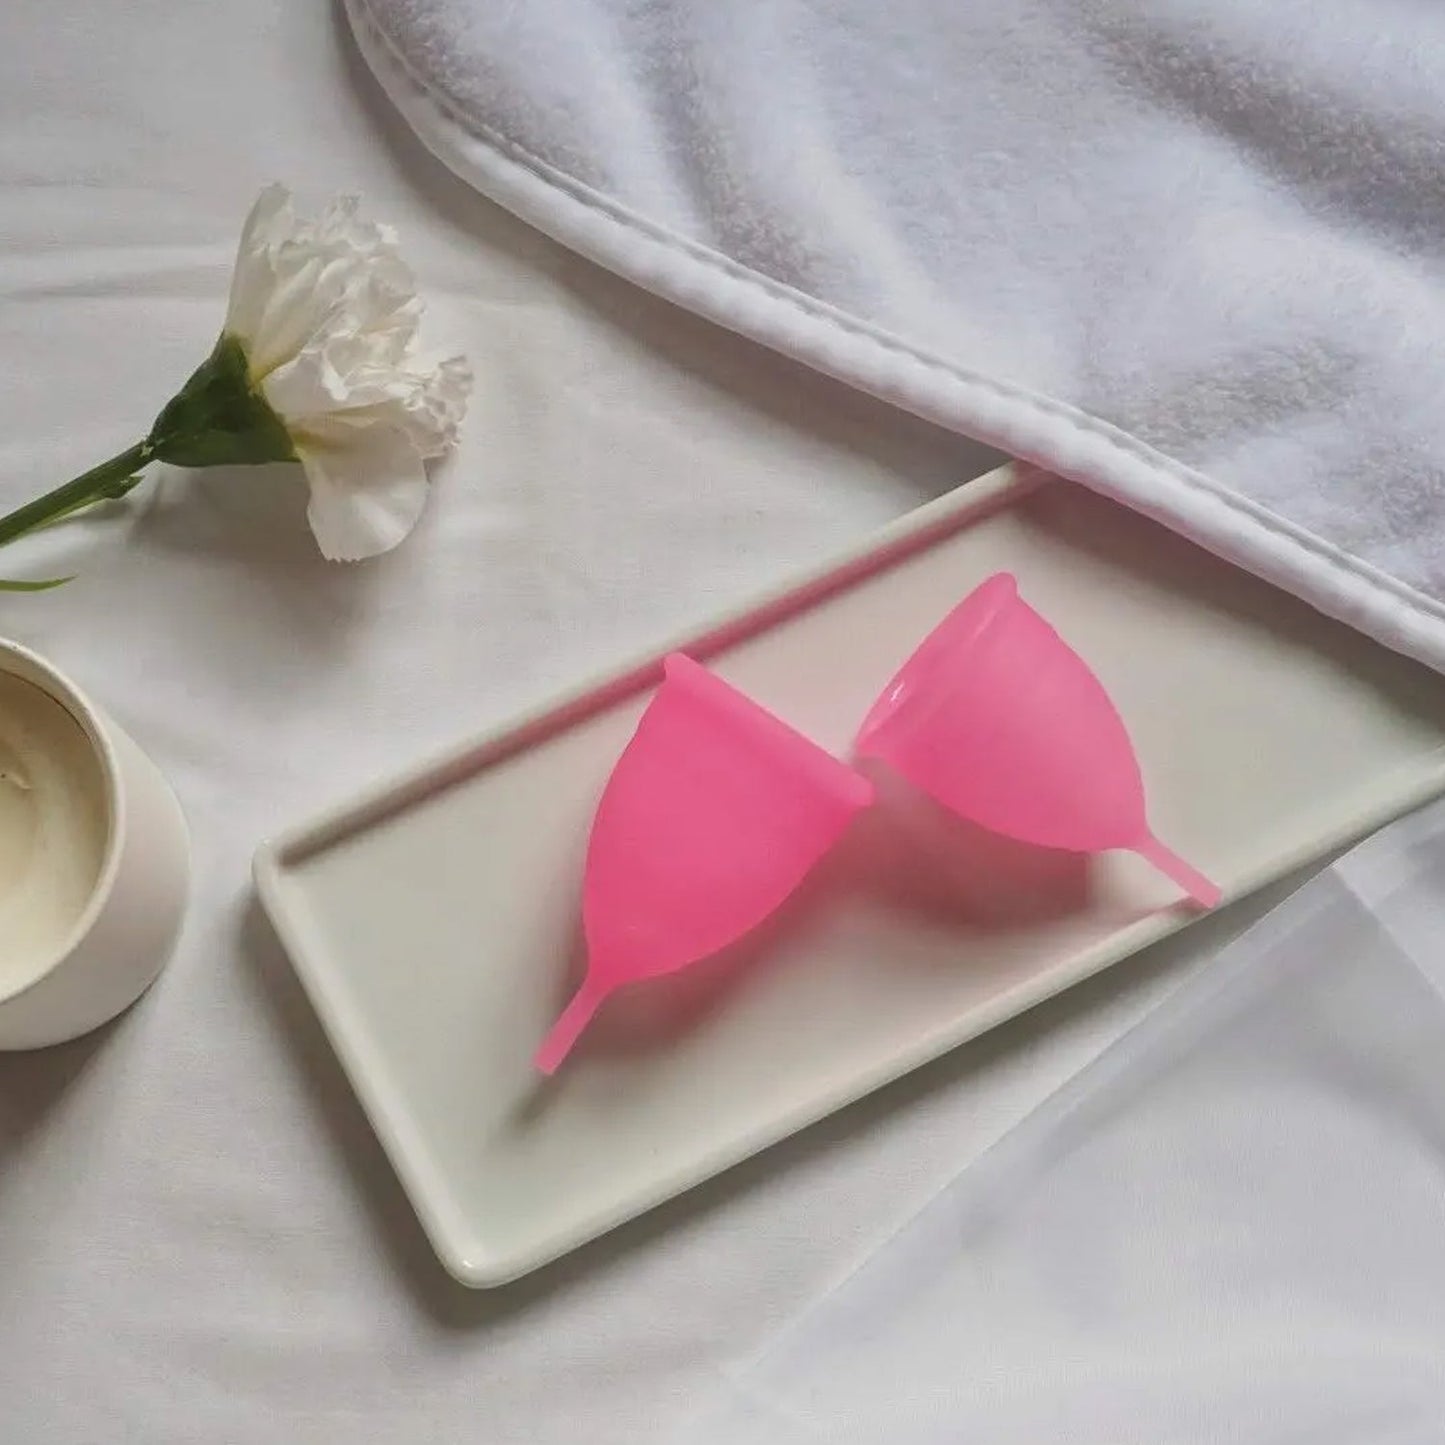 REUSABLE MENSTRUAL CUP FOR MENSTRUAL CYCLE